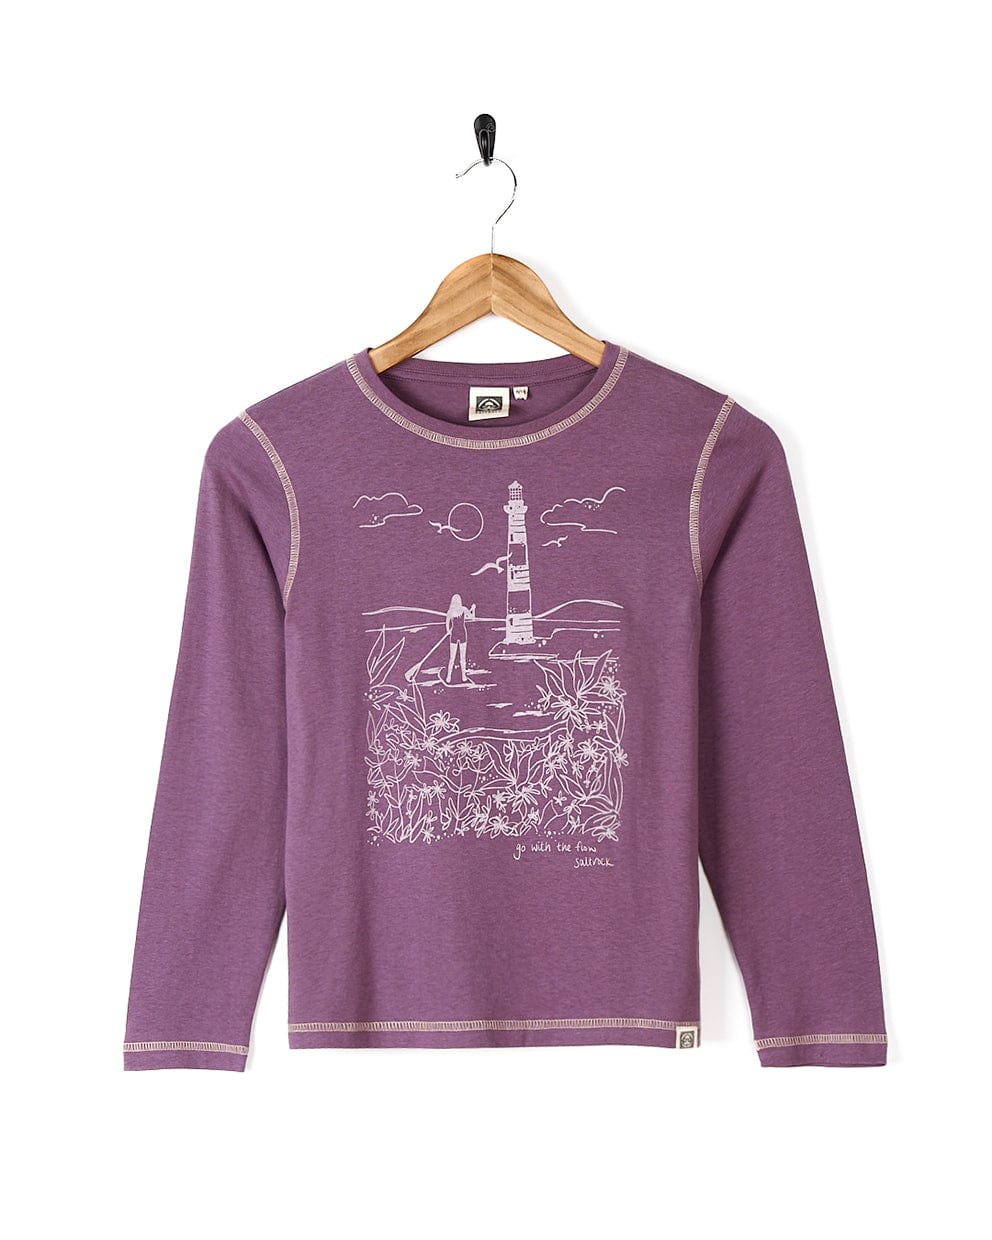 A Saltrock Sup Girl - Kids Long Sleeve T-Shirt - Purple with a graphic of a lighthouse.